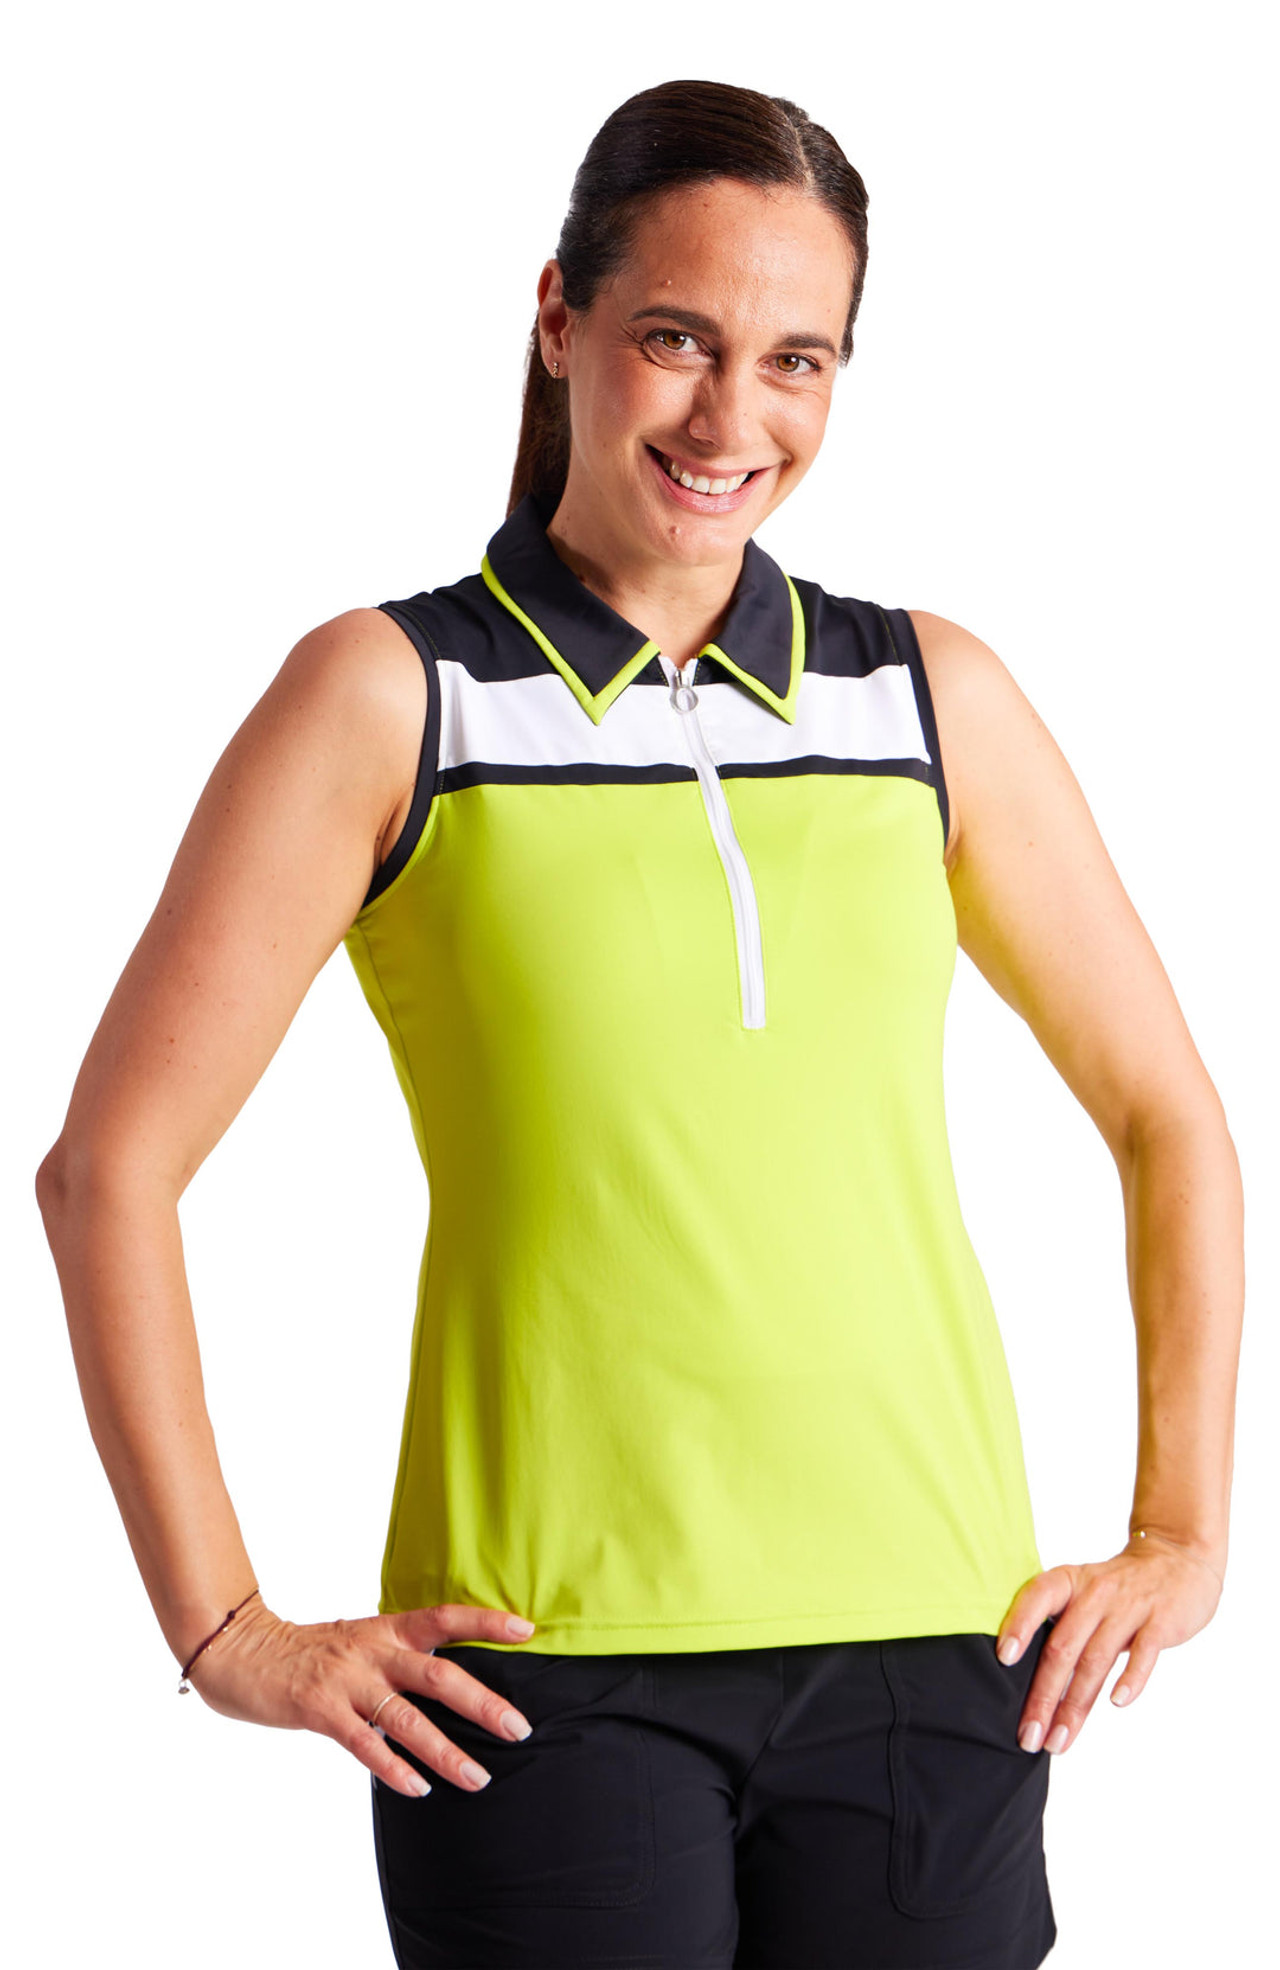 Daily Sports Magic Woman's High Water Pants 32 - Green - Fore Ladies -  Golf Dresses and Clothes, Tennis Skirts and Outfits, and Fashionable  Activewear